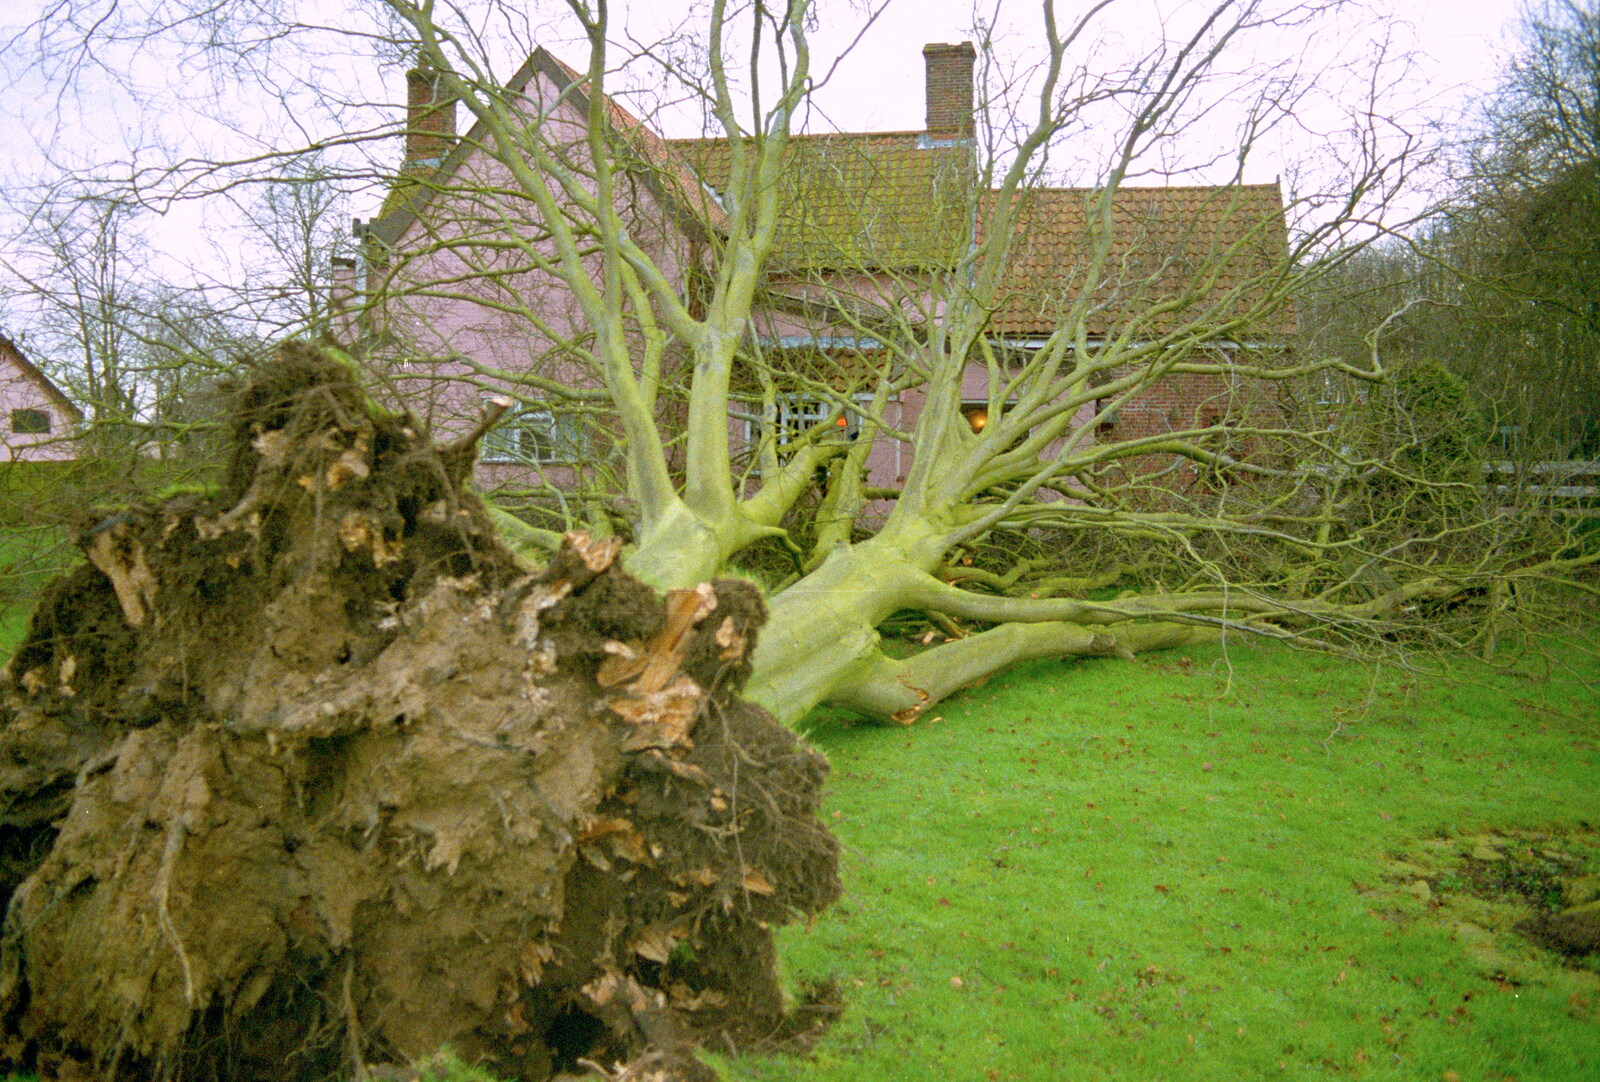 A view of the tree and stump from the back garden from A Fallen Tree at The Swan Inn, Brome, Suffolk - January 21st 2001